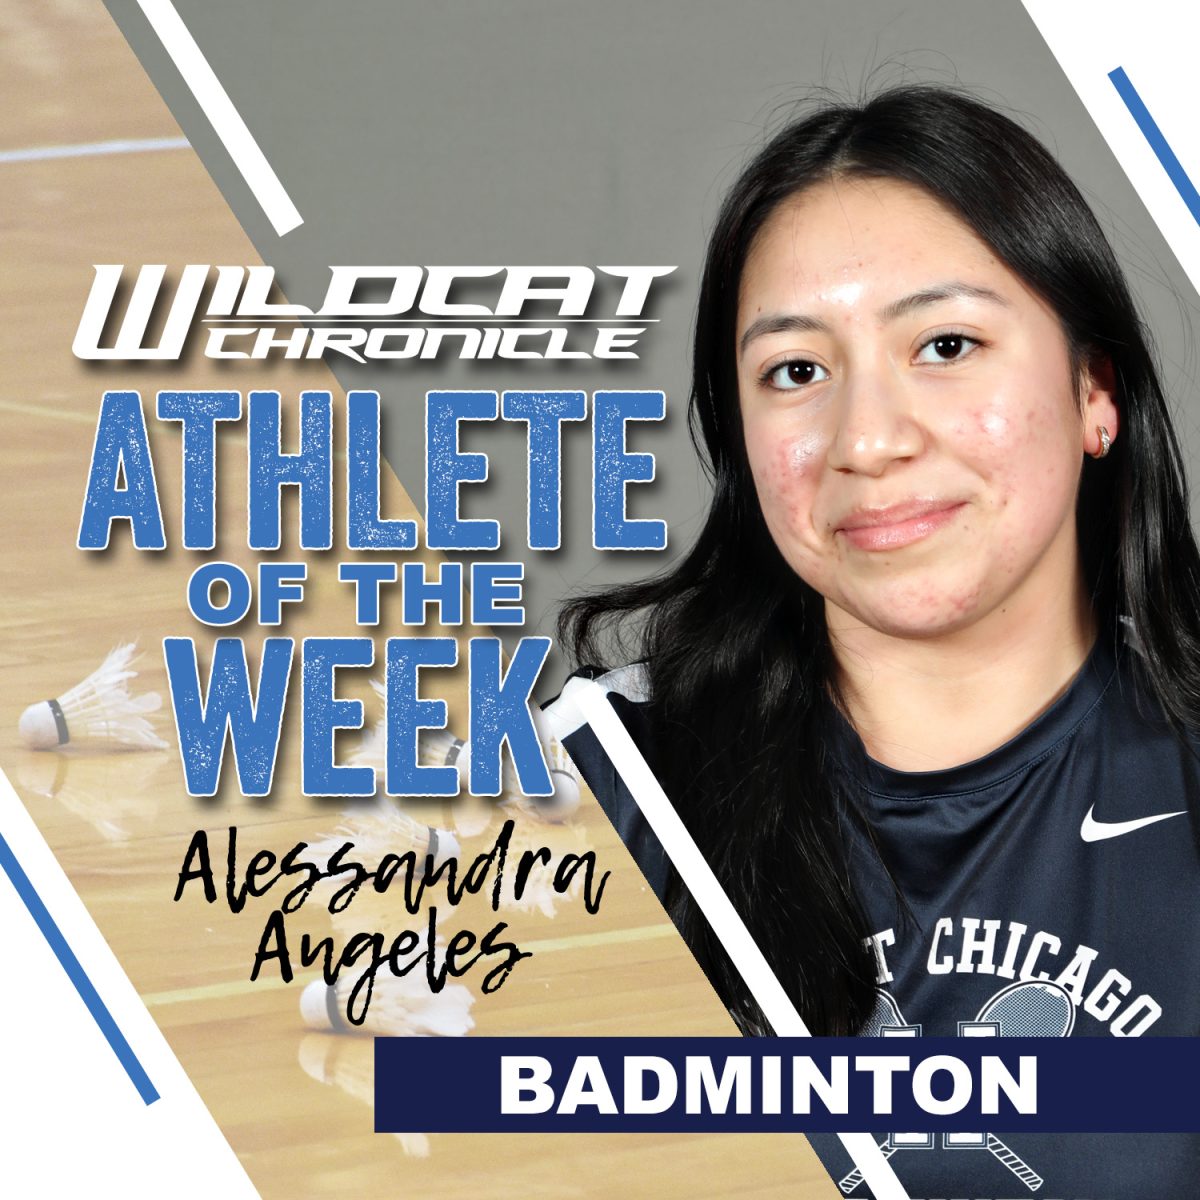 APRIL 21-27: Senior Alessandra Angeles is not only an amazing player who has shown astounding growth over her time as an athlete, but is also an amazing leader and teammate. She was nominated as one of the captains this year, and has been great in that role, encouraging others and taking on leadership responsibilities, according to Coach Brown. (Photo illustration created by Wildcat Chronicle Staff using images by Alexa Morales and Lifetouch)